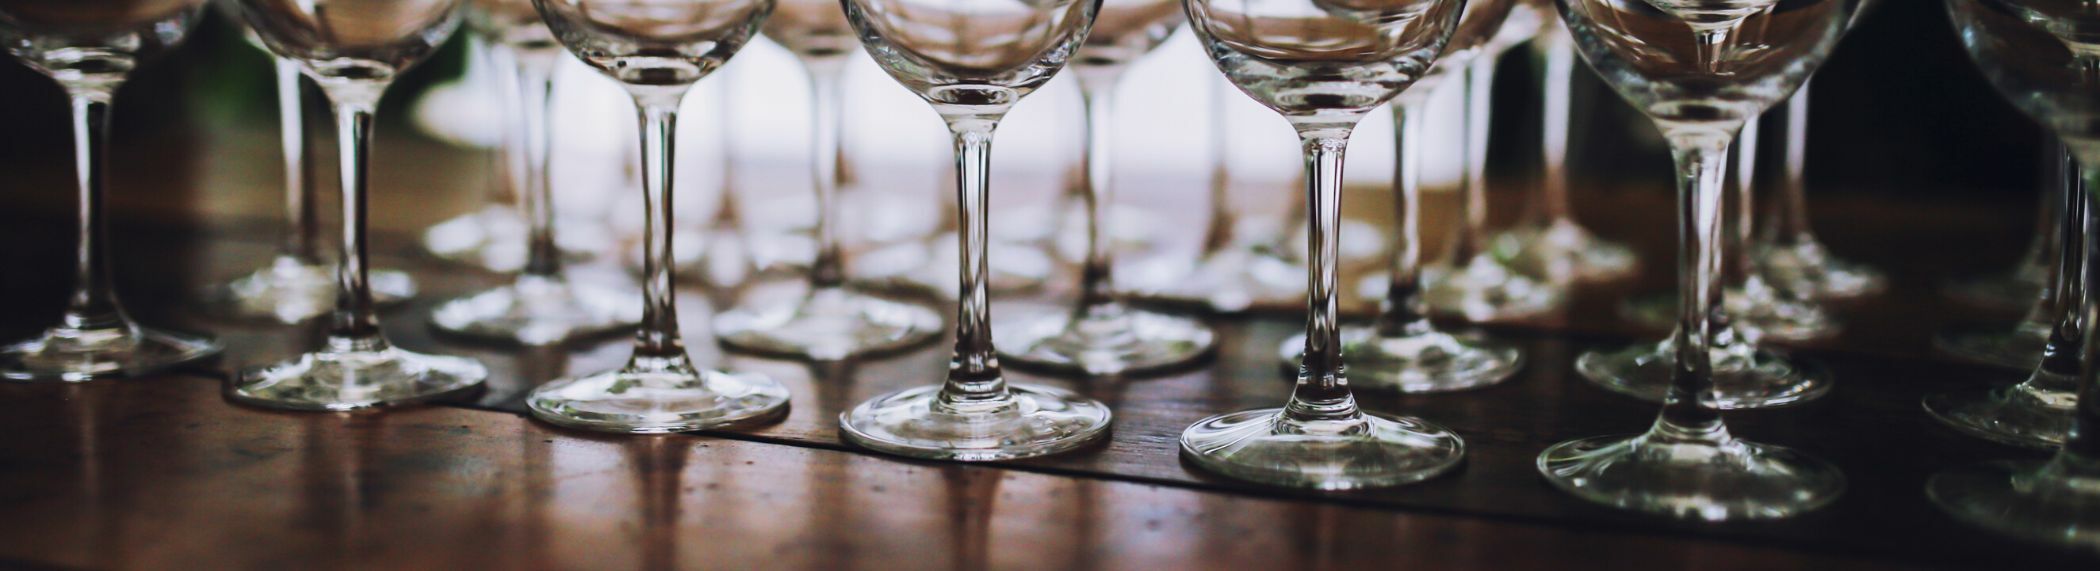 wine glasses lined up on a wooden bar